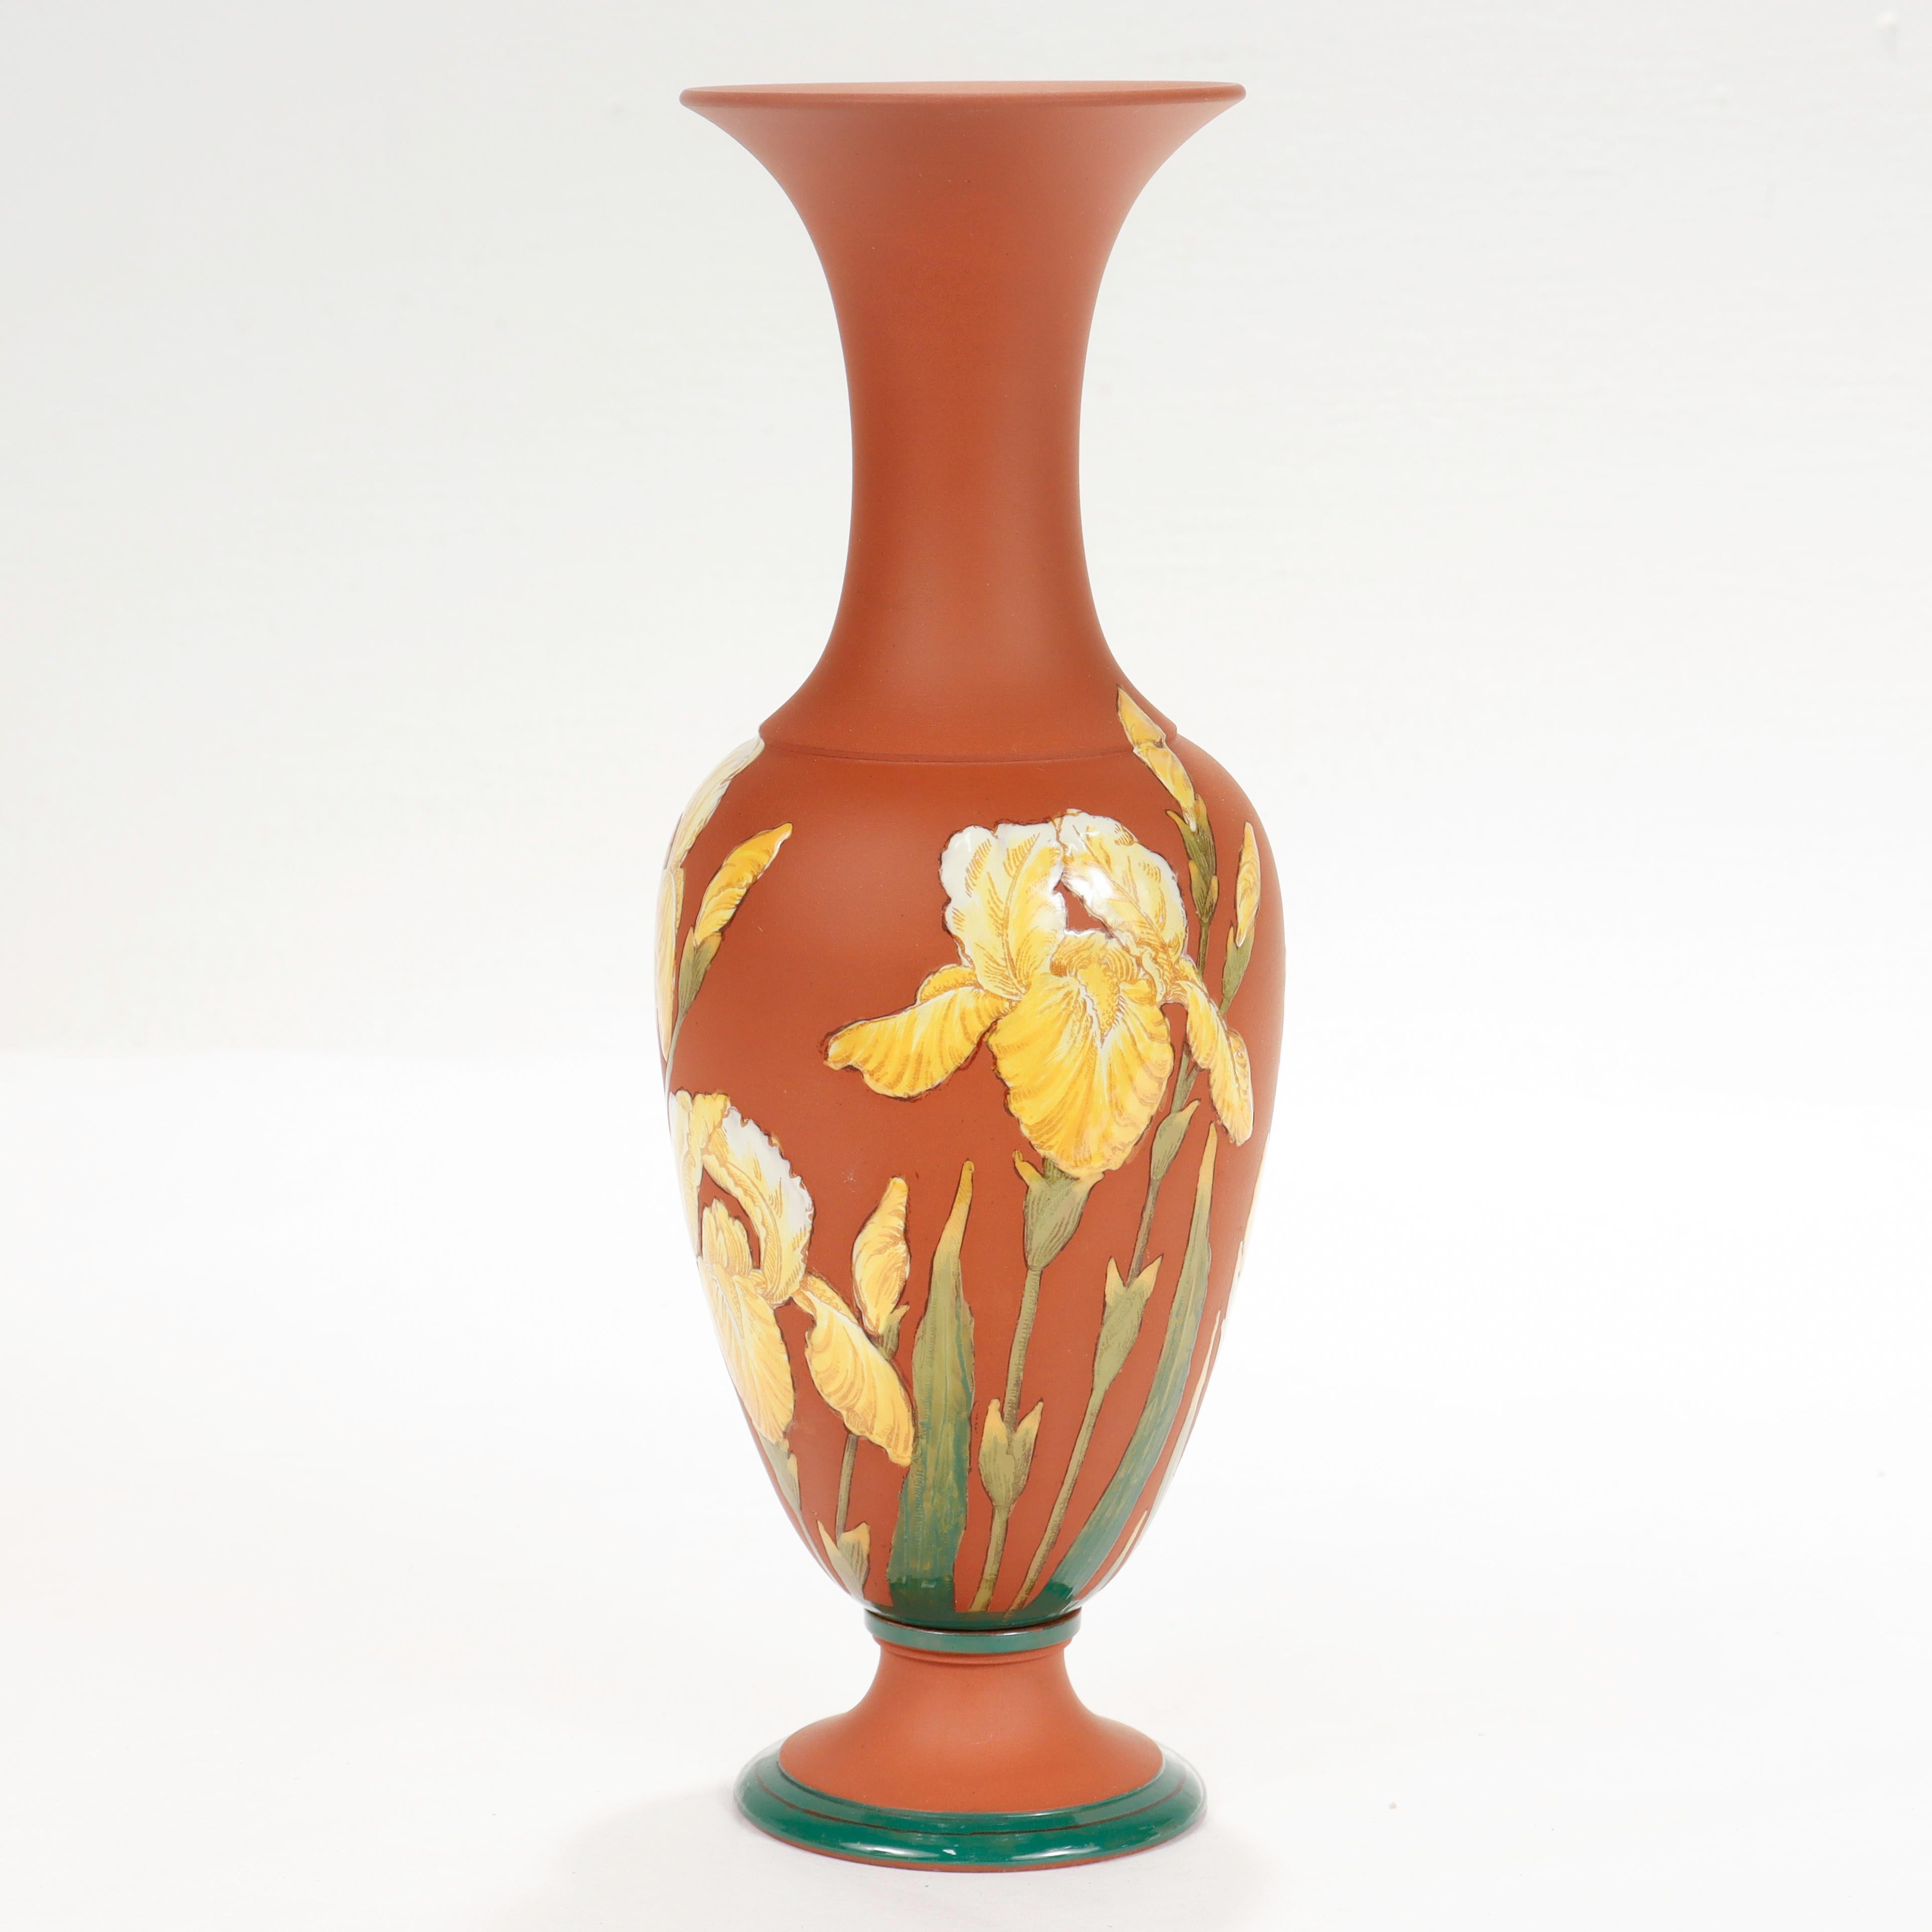 A fine antique enameled Wedgwood vase.

With a terracotta colored Rosso Antico baluster form body.

Decorated in a yellow enameled Kentlock Iris pattern around the circumference.

Simply an exceptional vase!

Date:
20th Century

Overall